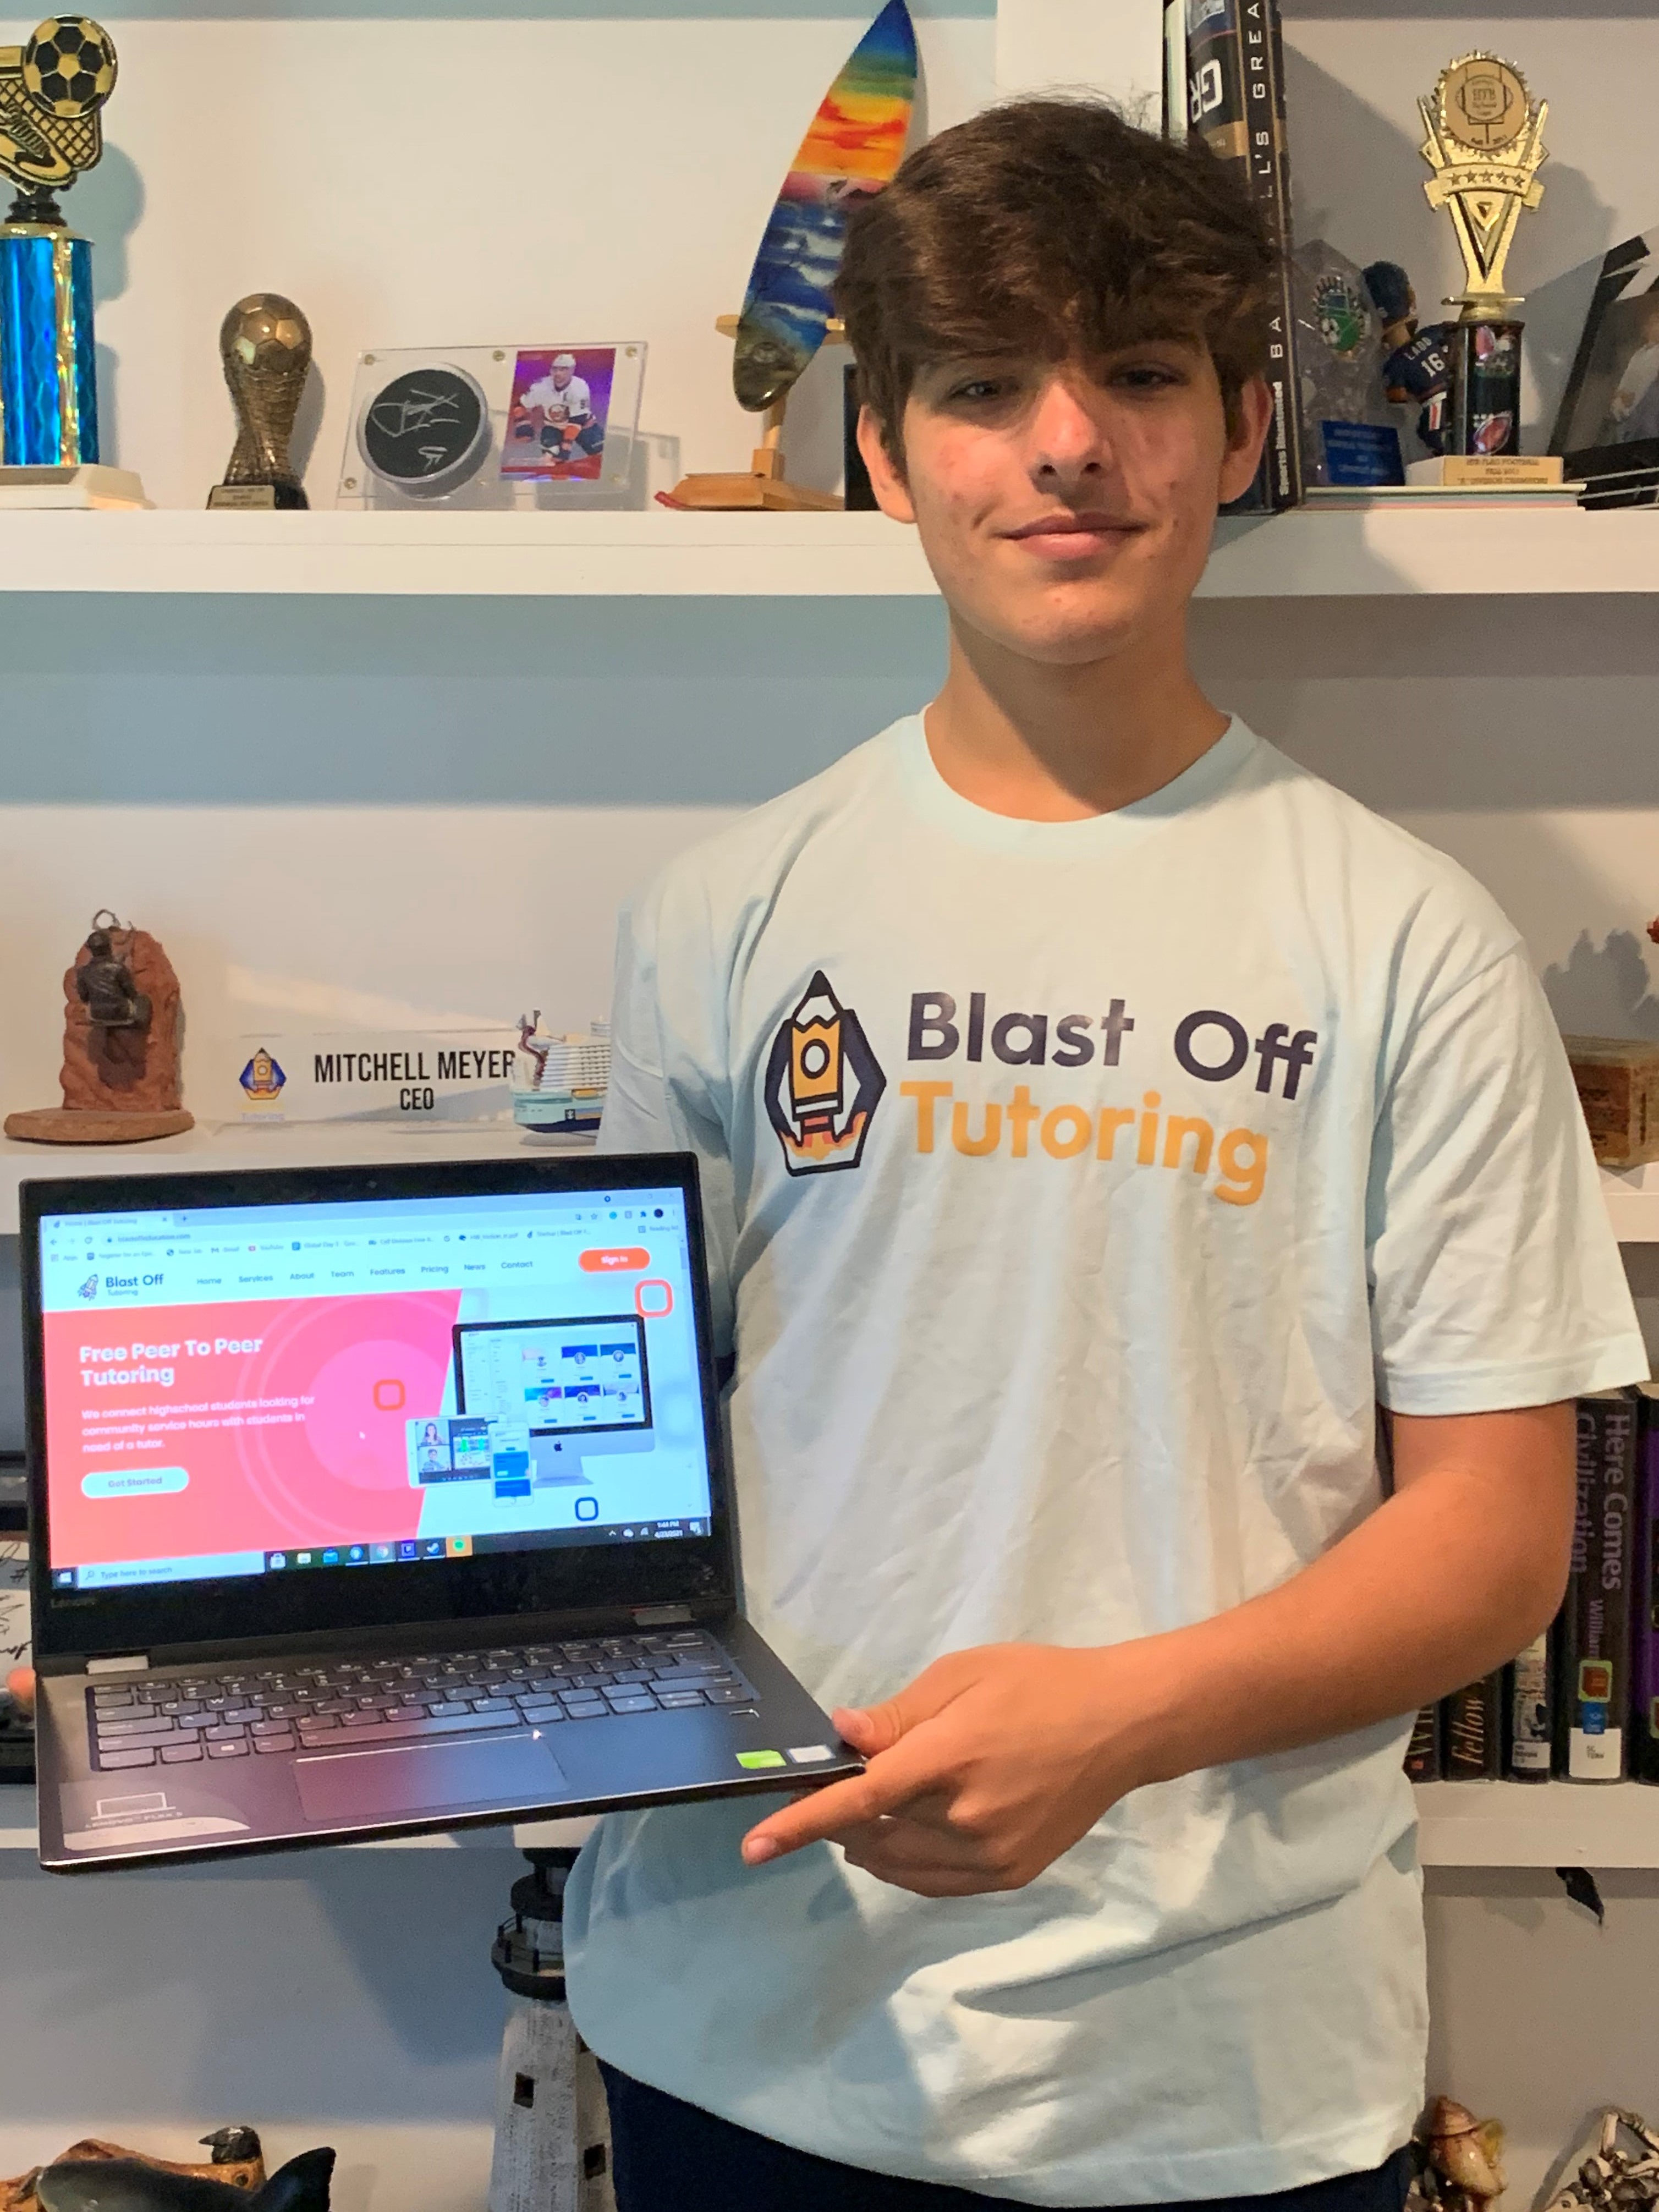 Student holding laptop with his website